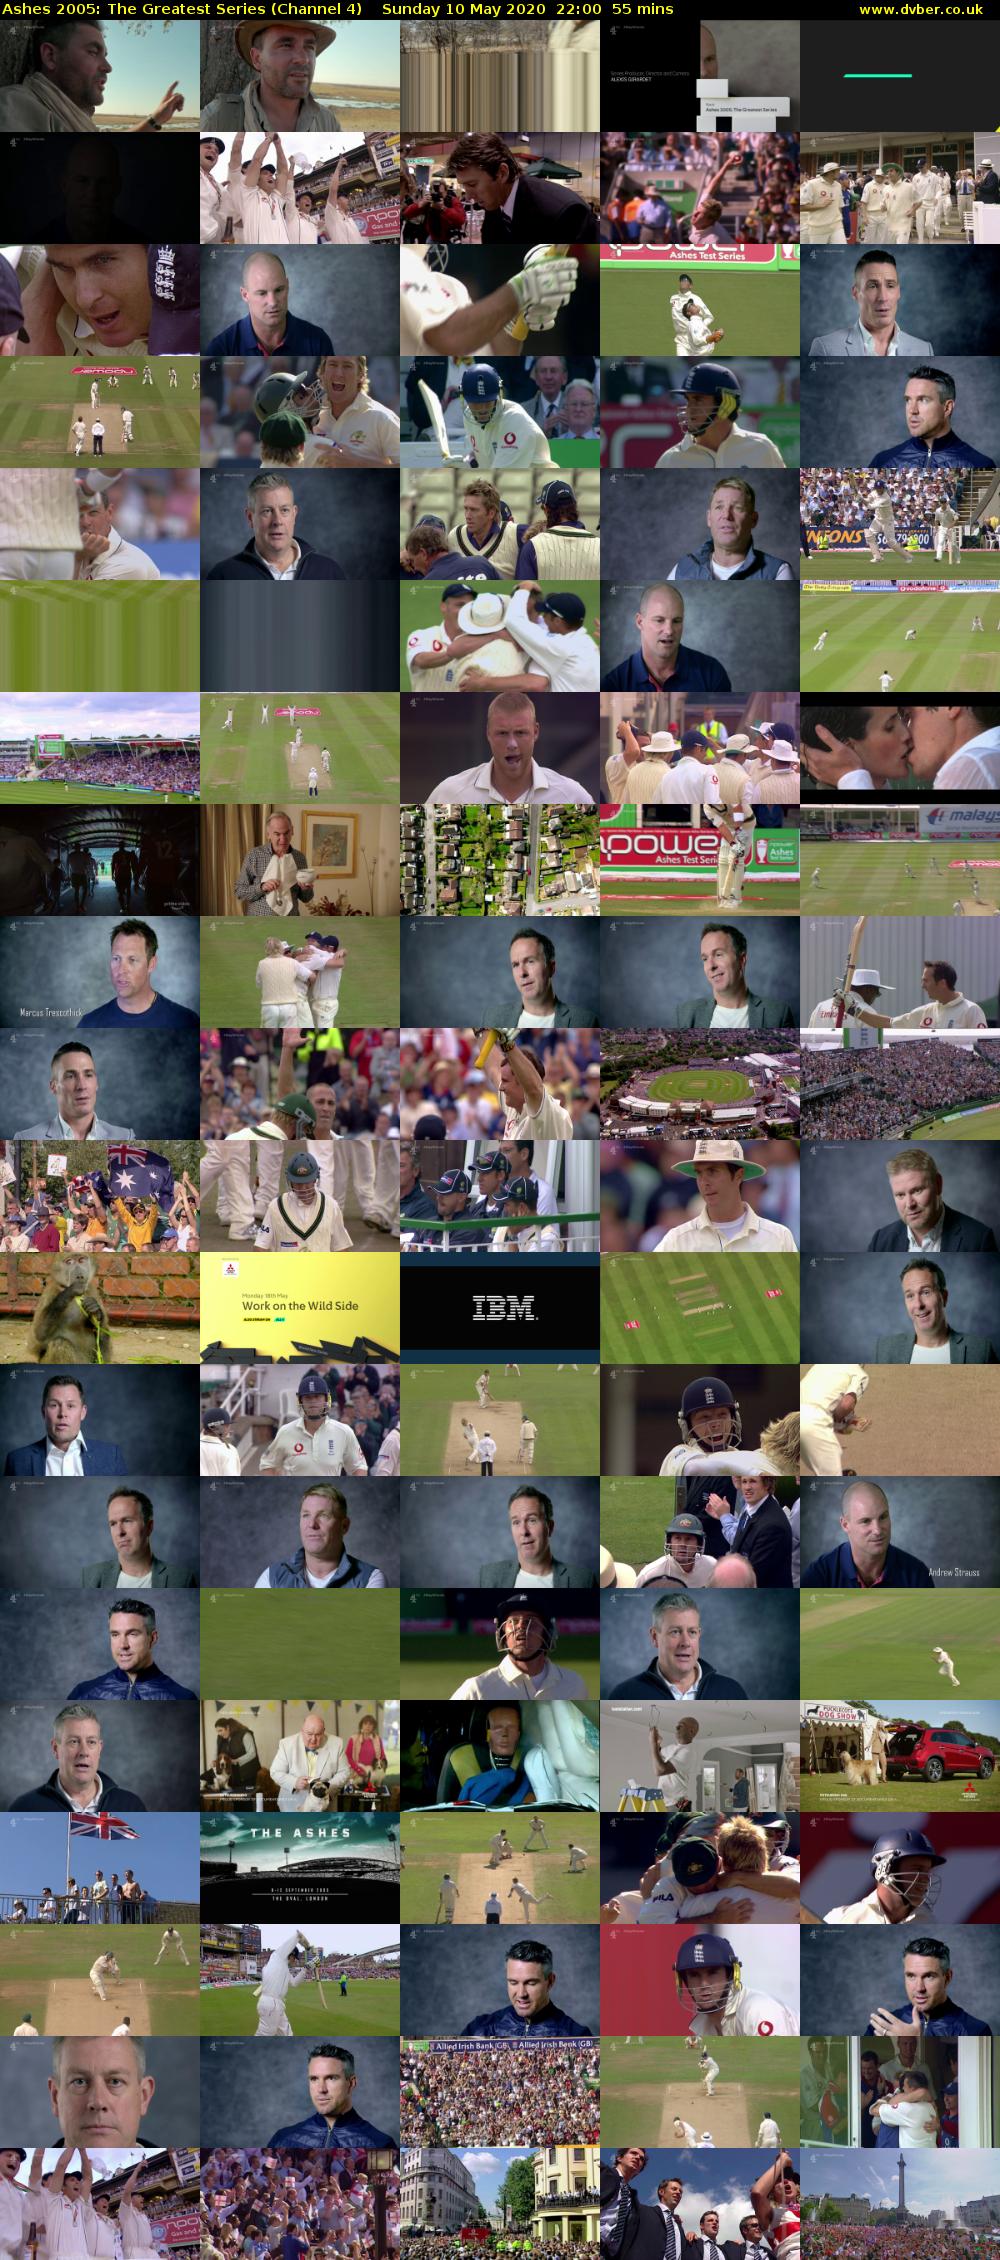 Ashes 2005: The Greatest Series (Channel 4) Sunday 10 May 2020 22:00 - 22:55